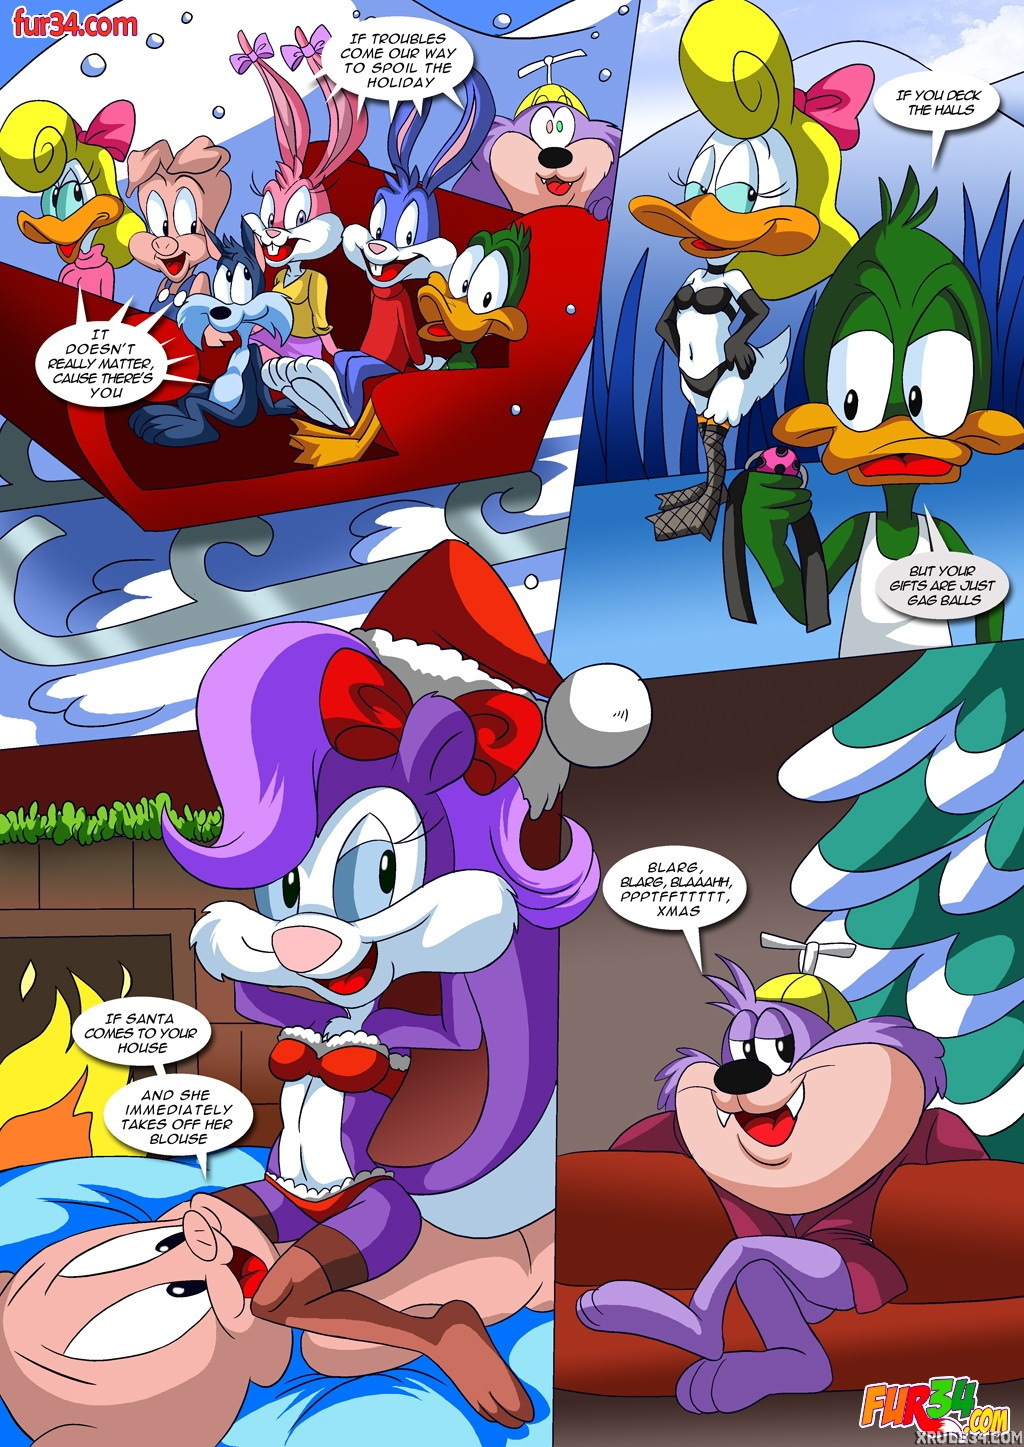 Its a wonderful sexy cristmas special - Page 16